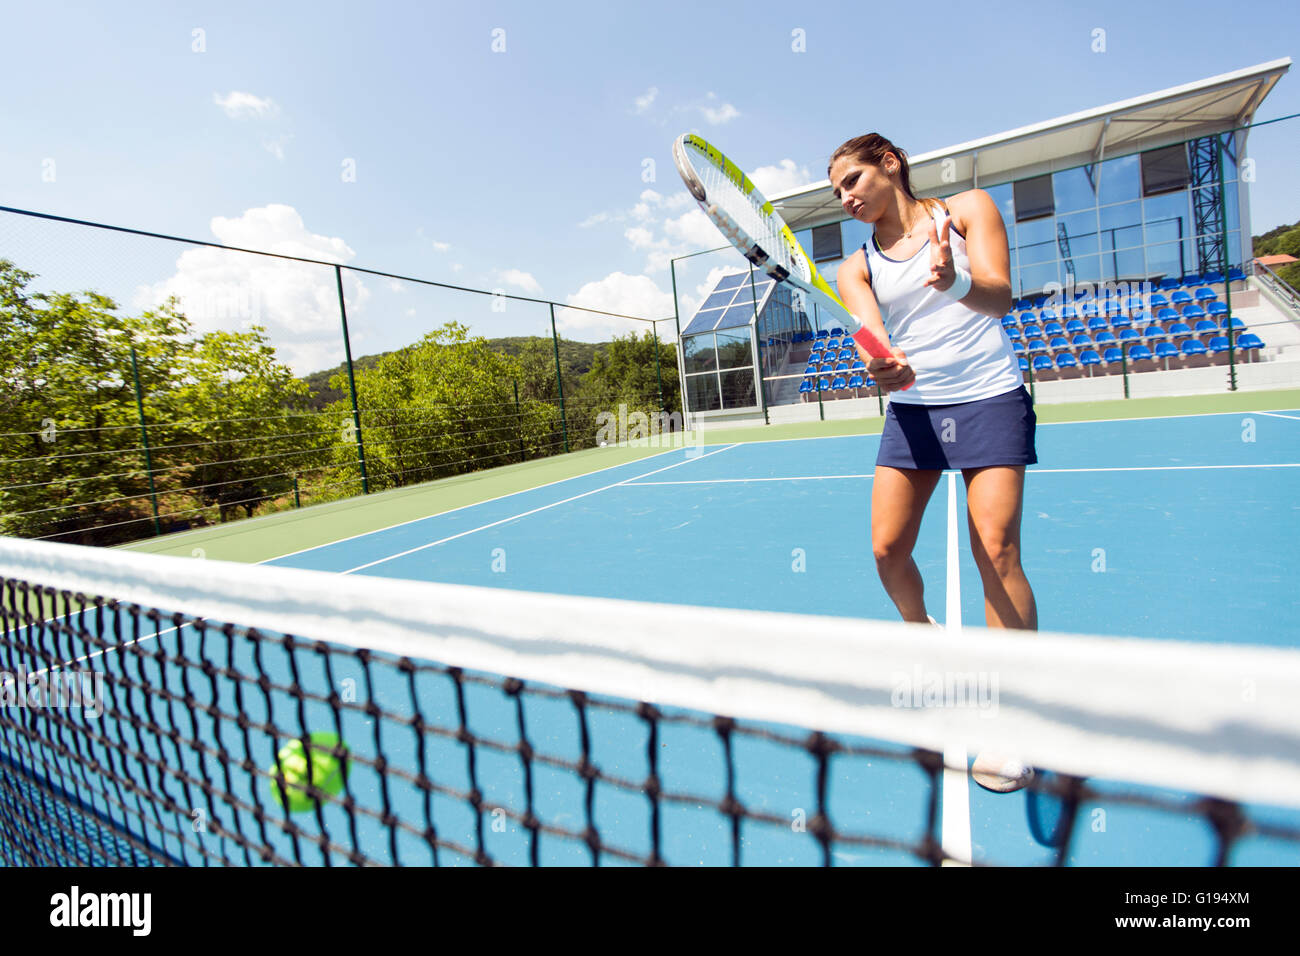 Female tennis player hitting the net and losing the point Stock Photo